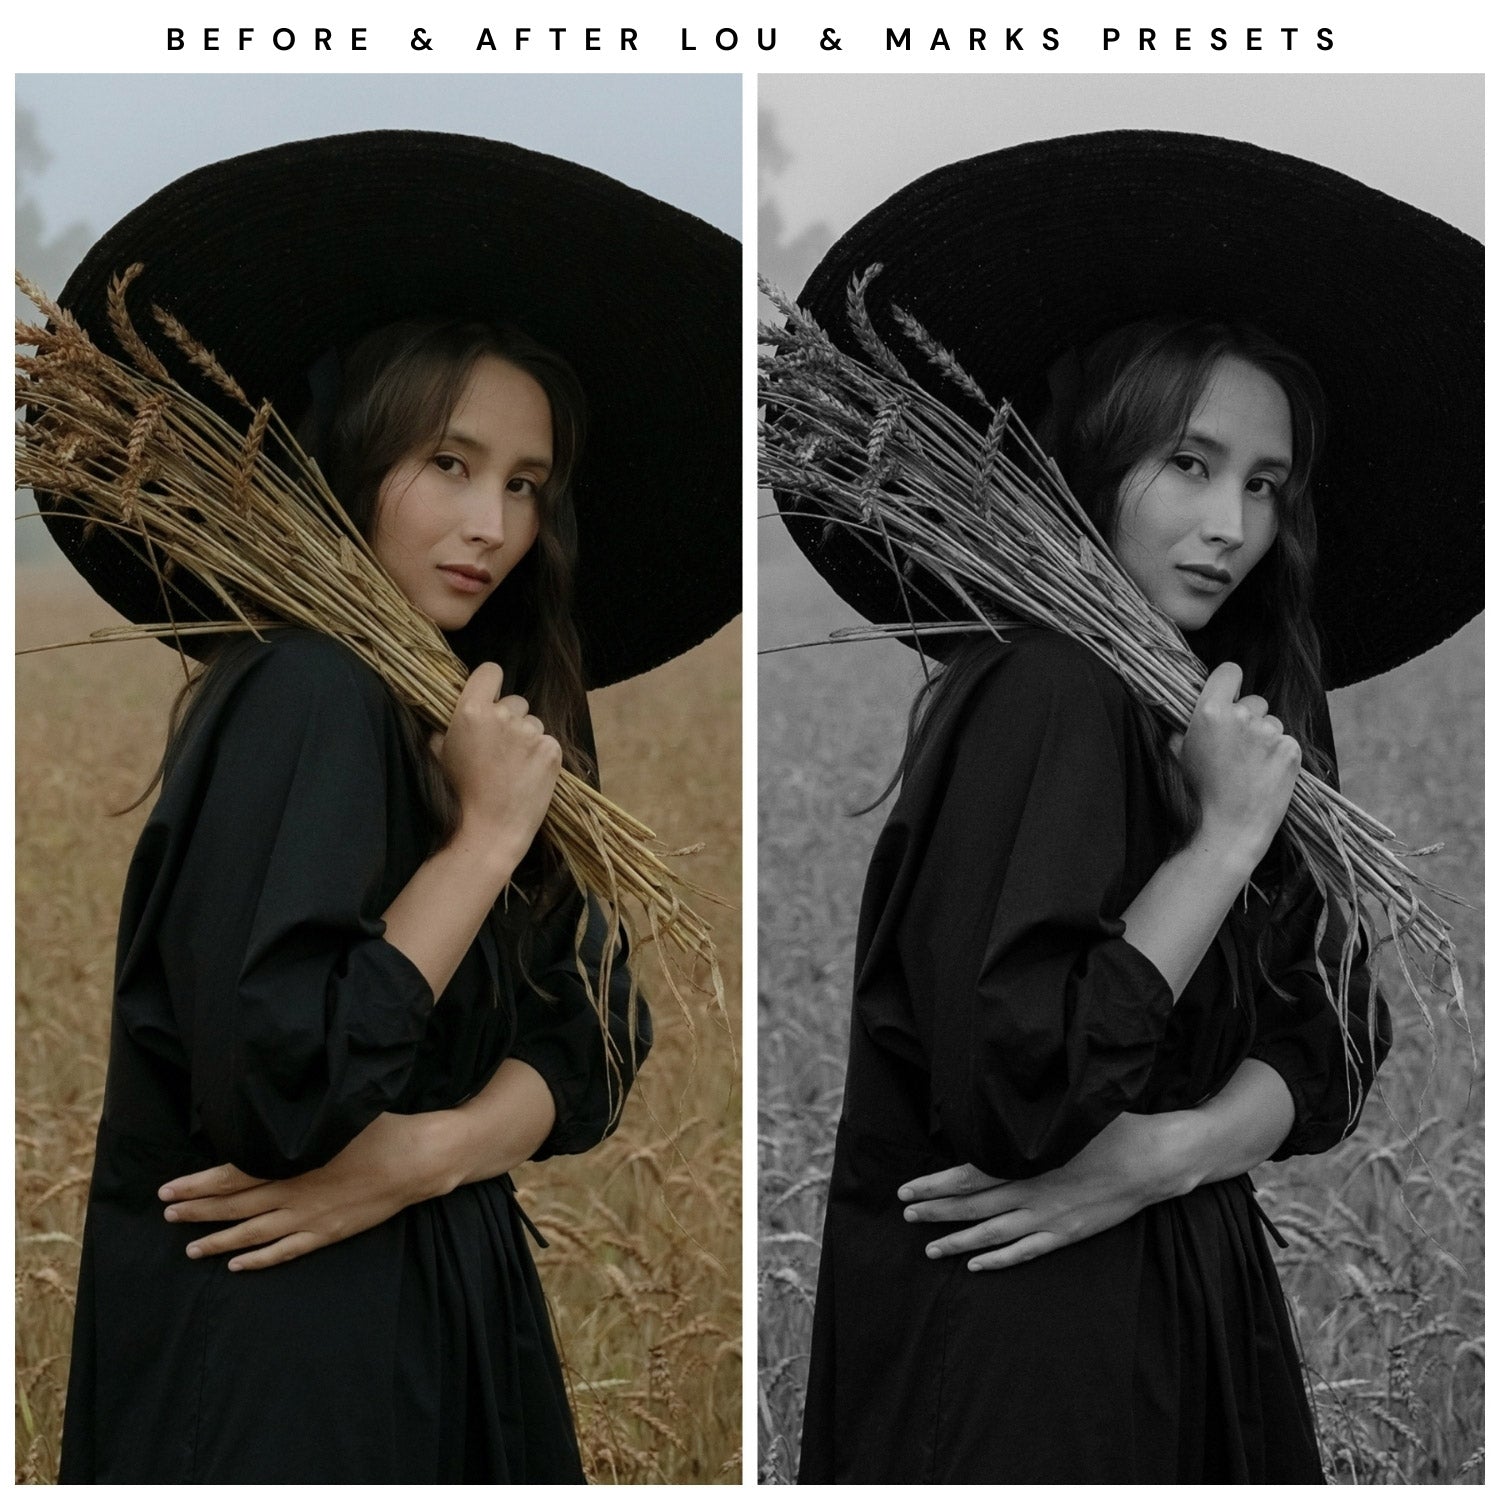 Lou And Marks Presets Moody Lightroom Presets Bundle The Best Moody Presets Black And White